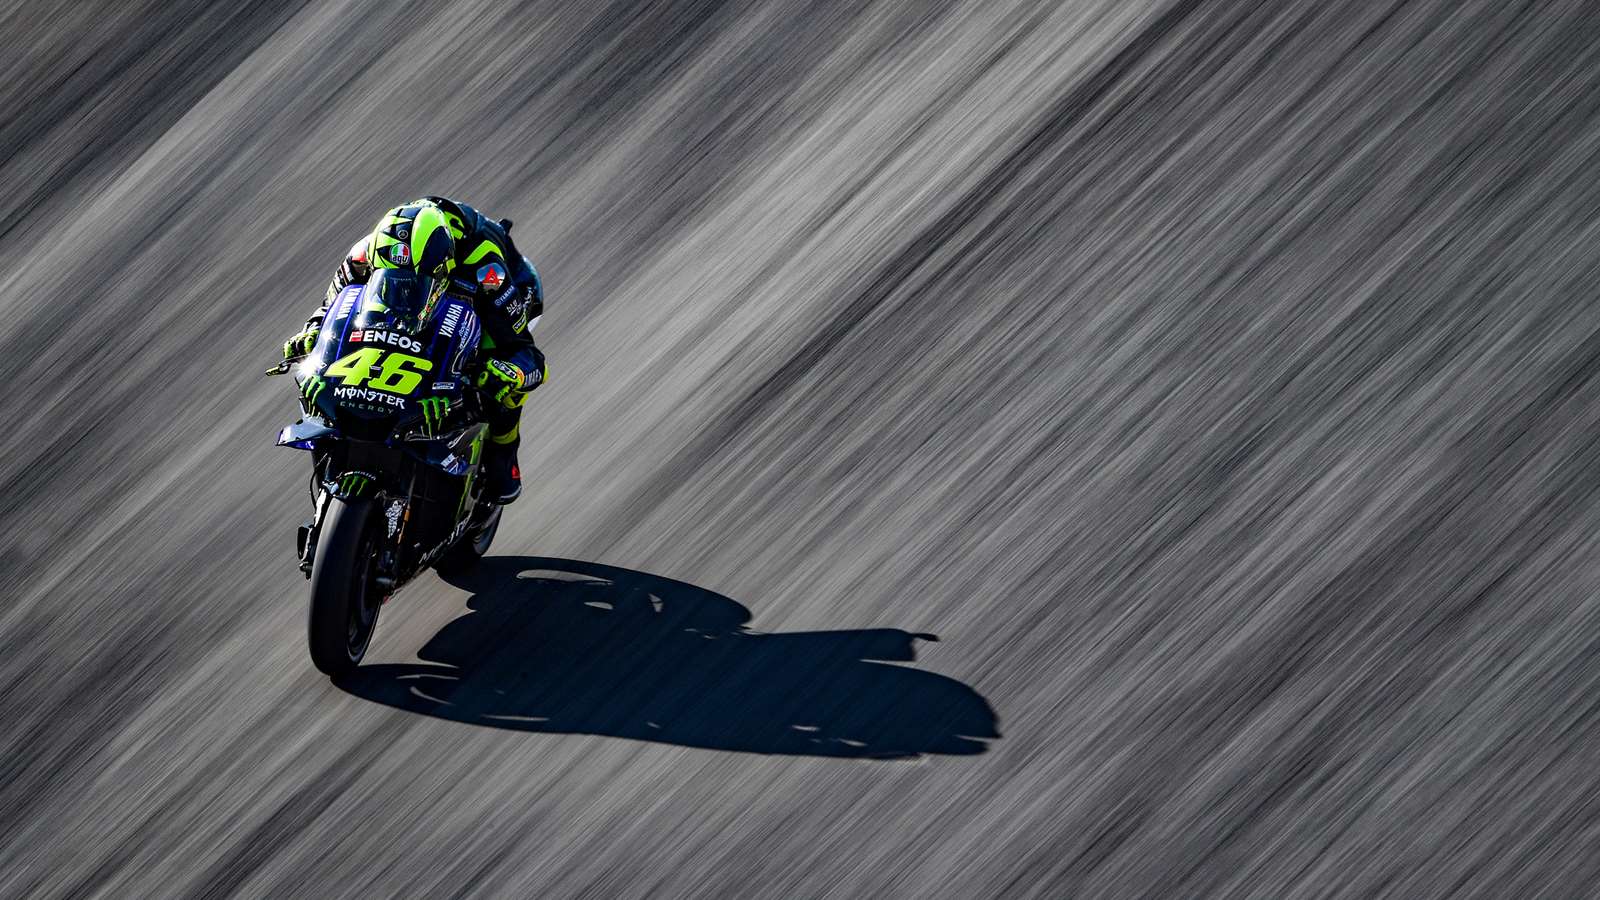 Will Valentino Rossi ever win another MotoGP title